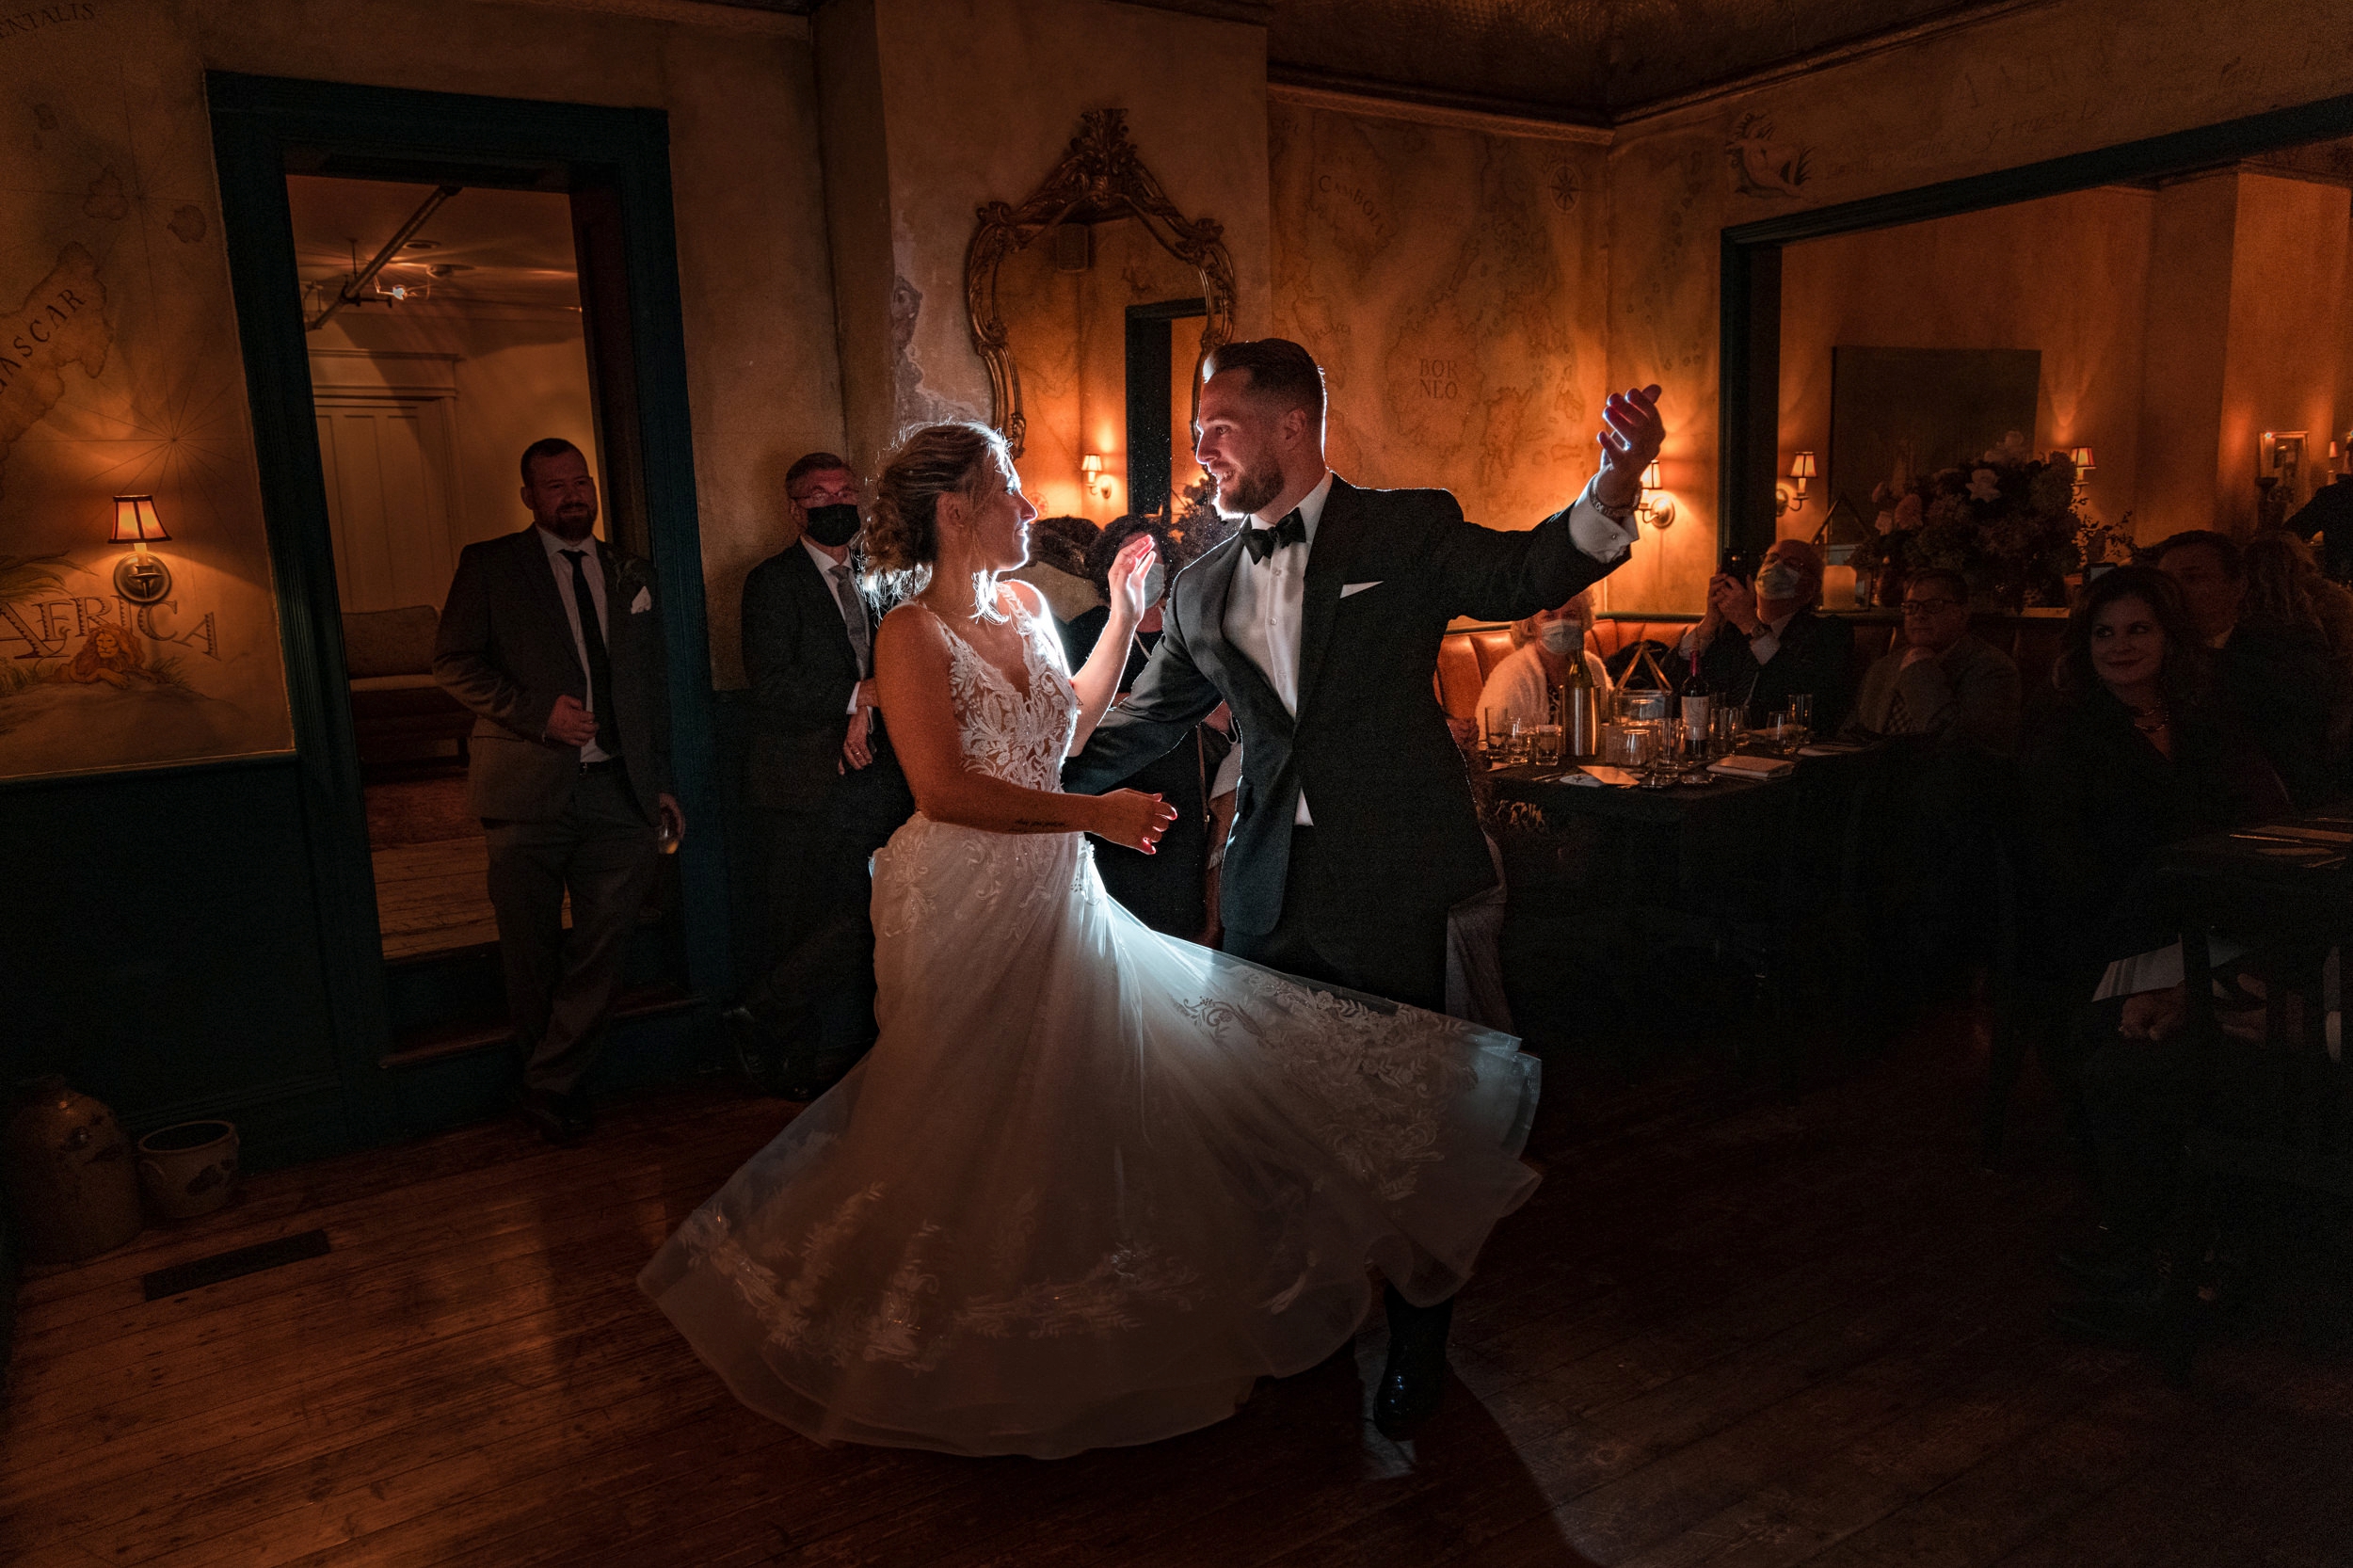 A bride and groom share their first dance at a Meadow Ridge on the Hudson Wedding, surrounded by guests in a dimly lit room.